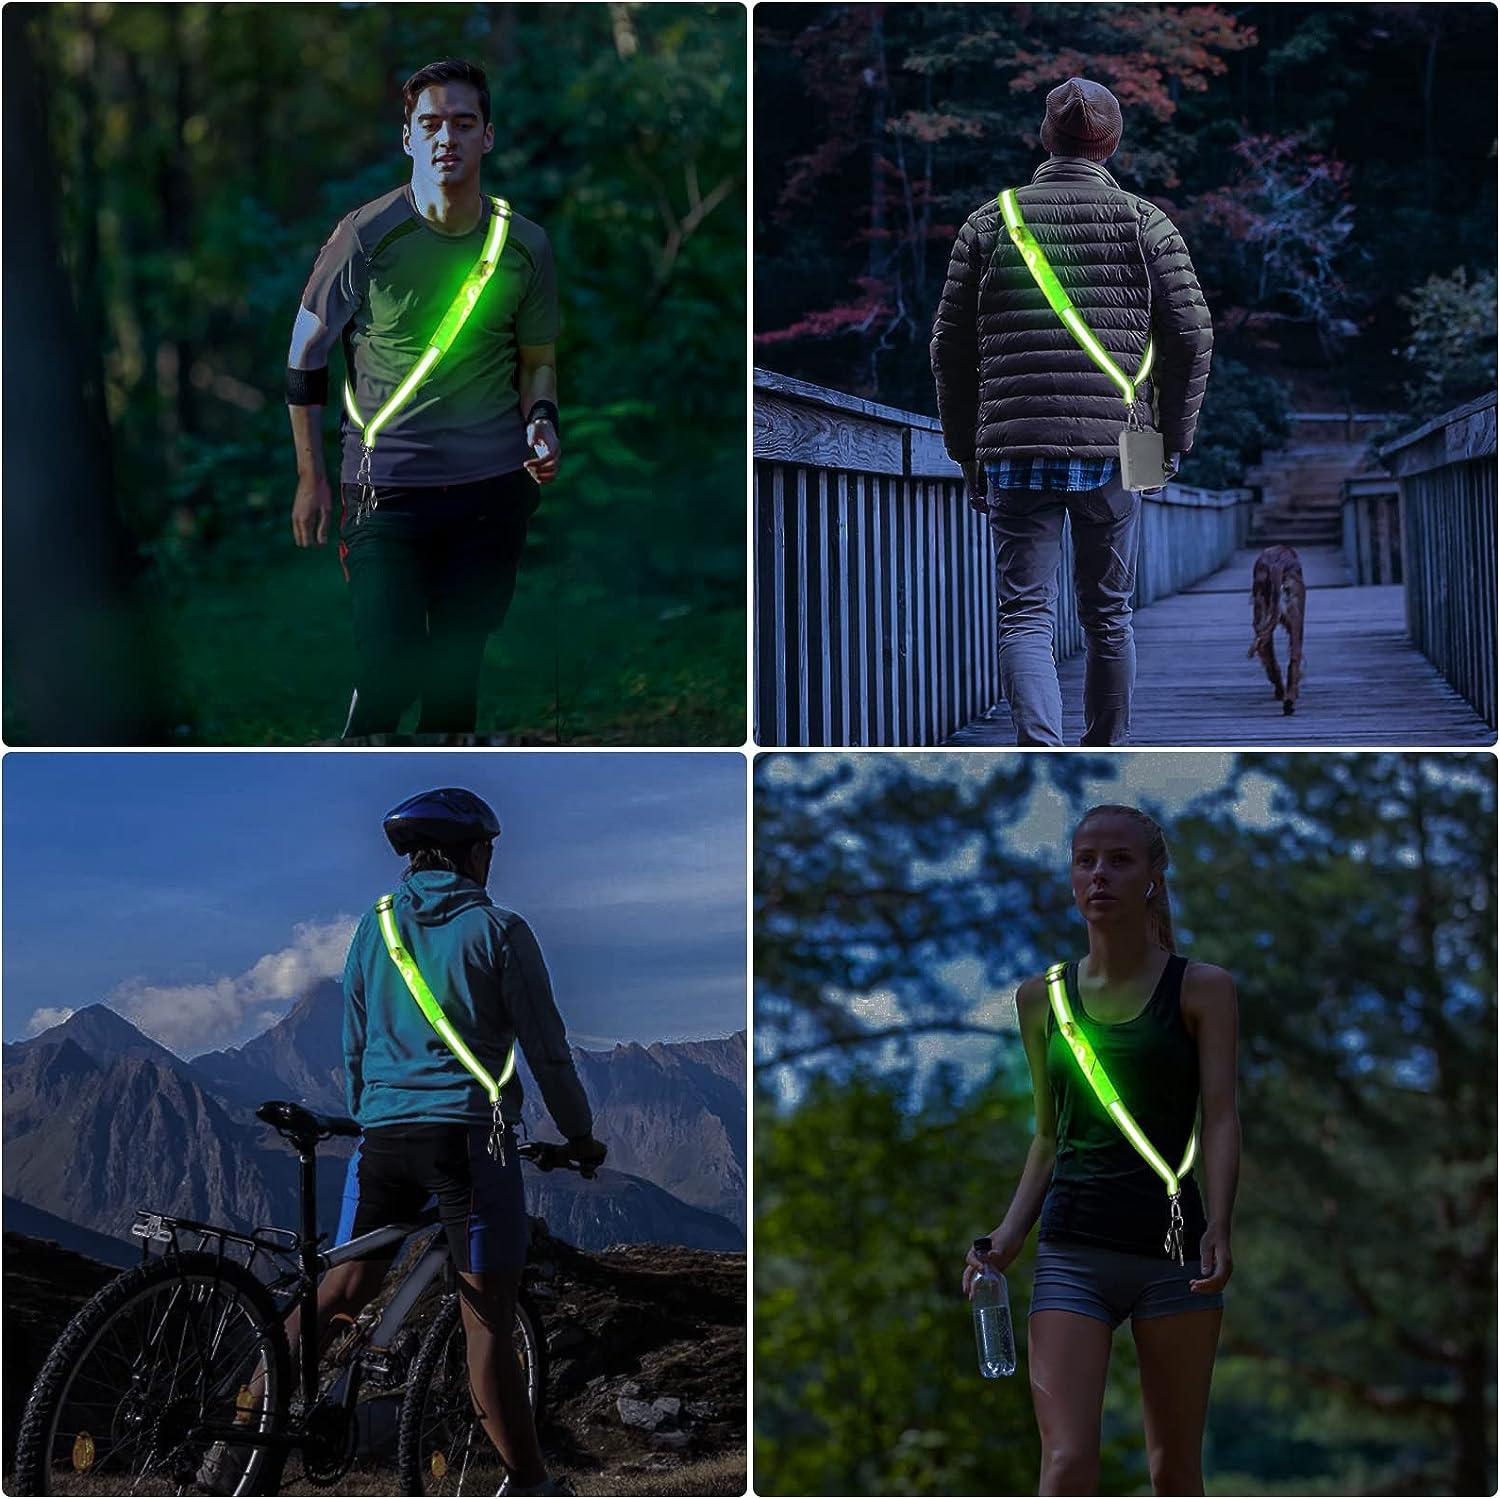 Led Reflective Belt Sash For Walking At Night,rechargeable Led Running Belt  For Runners Walkers,gre